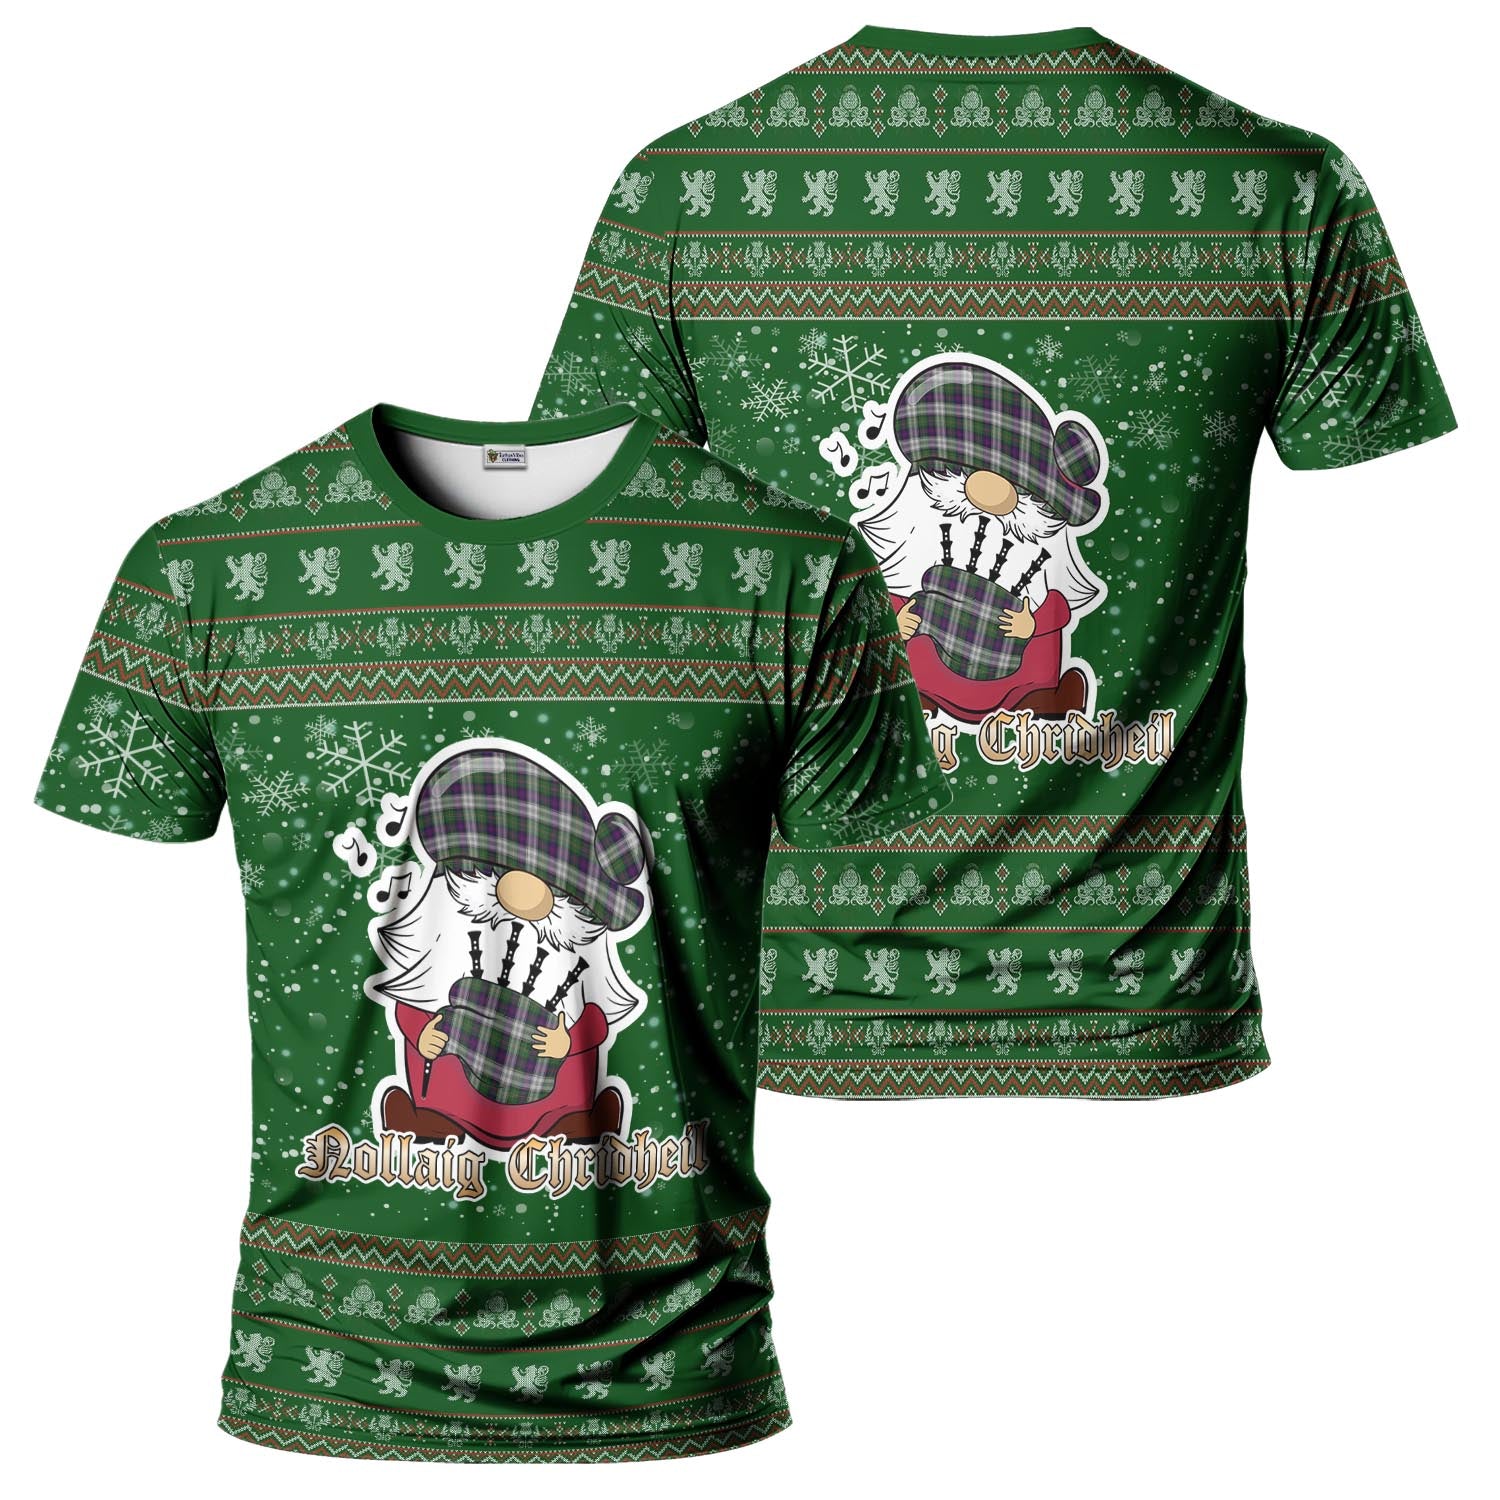 MacCallum Dress Clan Christmas Family T-Shirt with Funny Gnome Playing Bagpipes Men's Shirt Green - Tartanvibesclothing